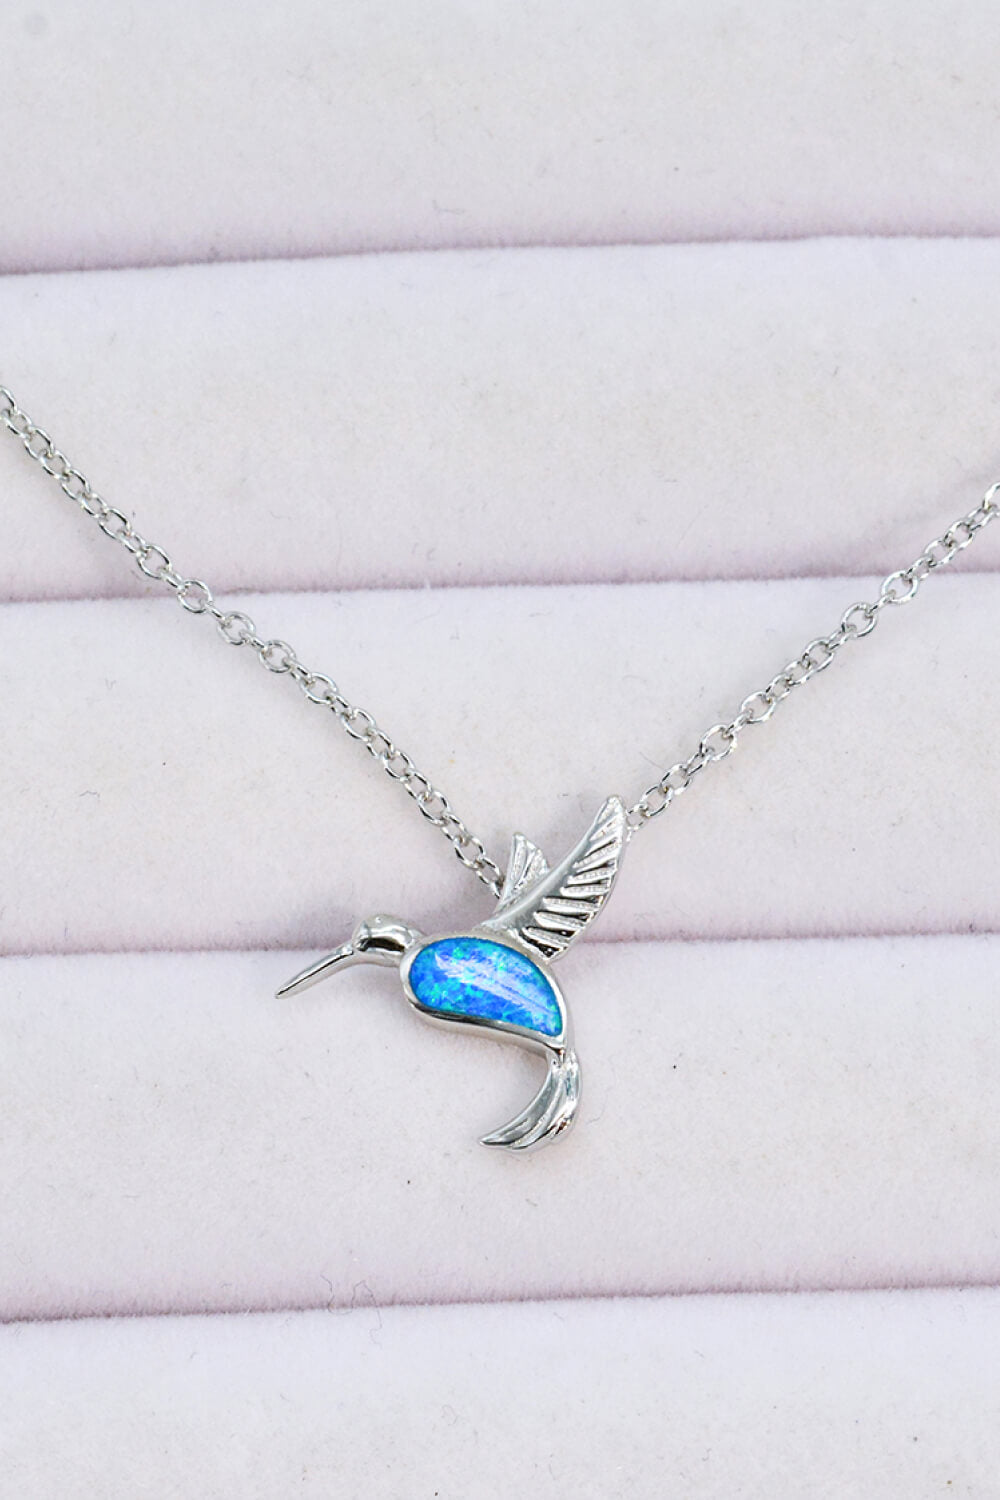 Opal Bird 925 Sterling Silver Necklace - Tophatter Shopping Deals - Electronics, Jewelry, Auction, App, Bidding, Gadgets, Fashion